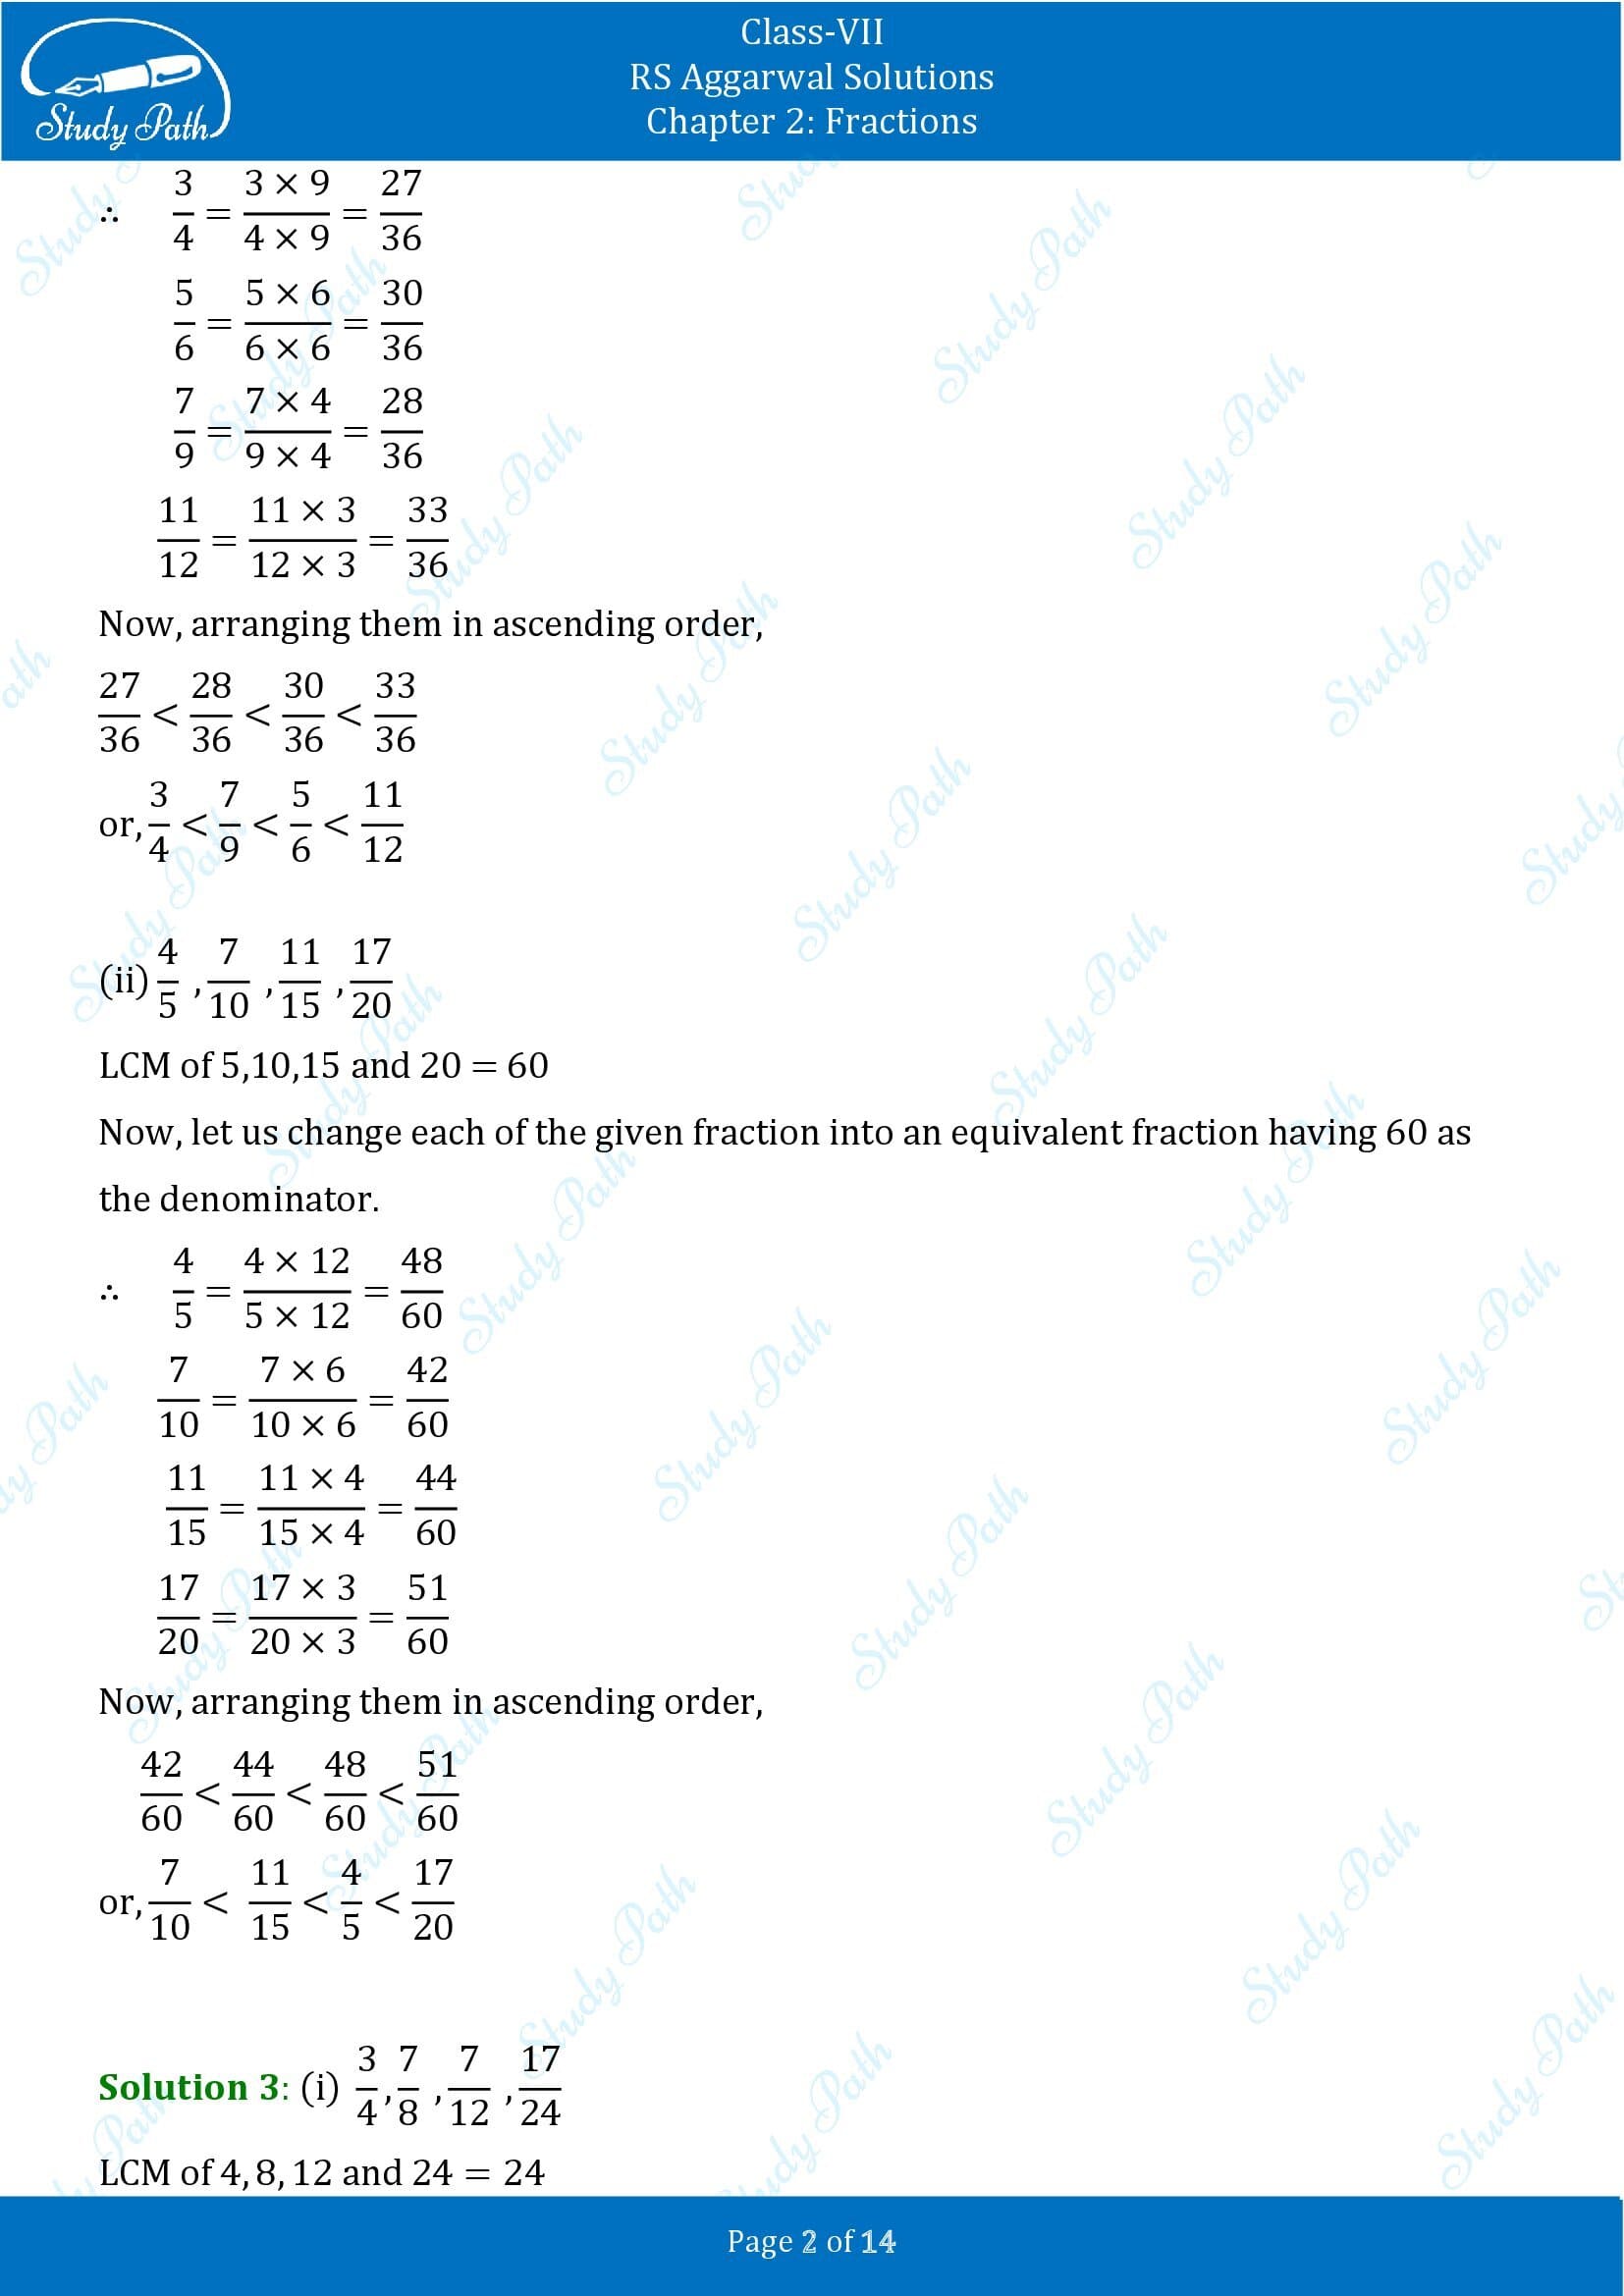 RS Aggarwal Solutions Class 7 Chapter 2 Fractions Exercise 2A 00002